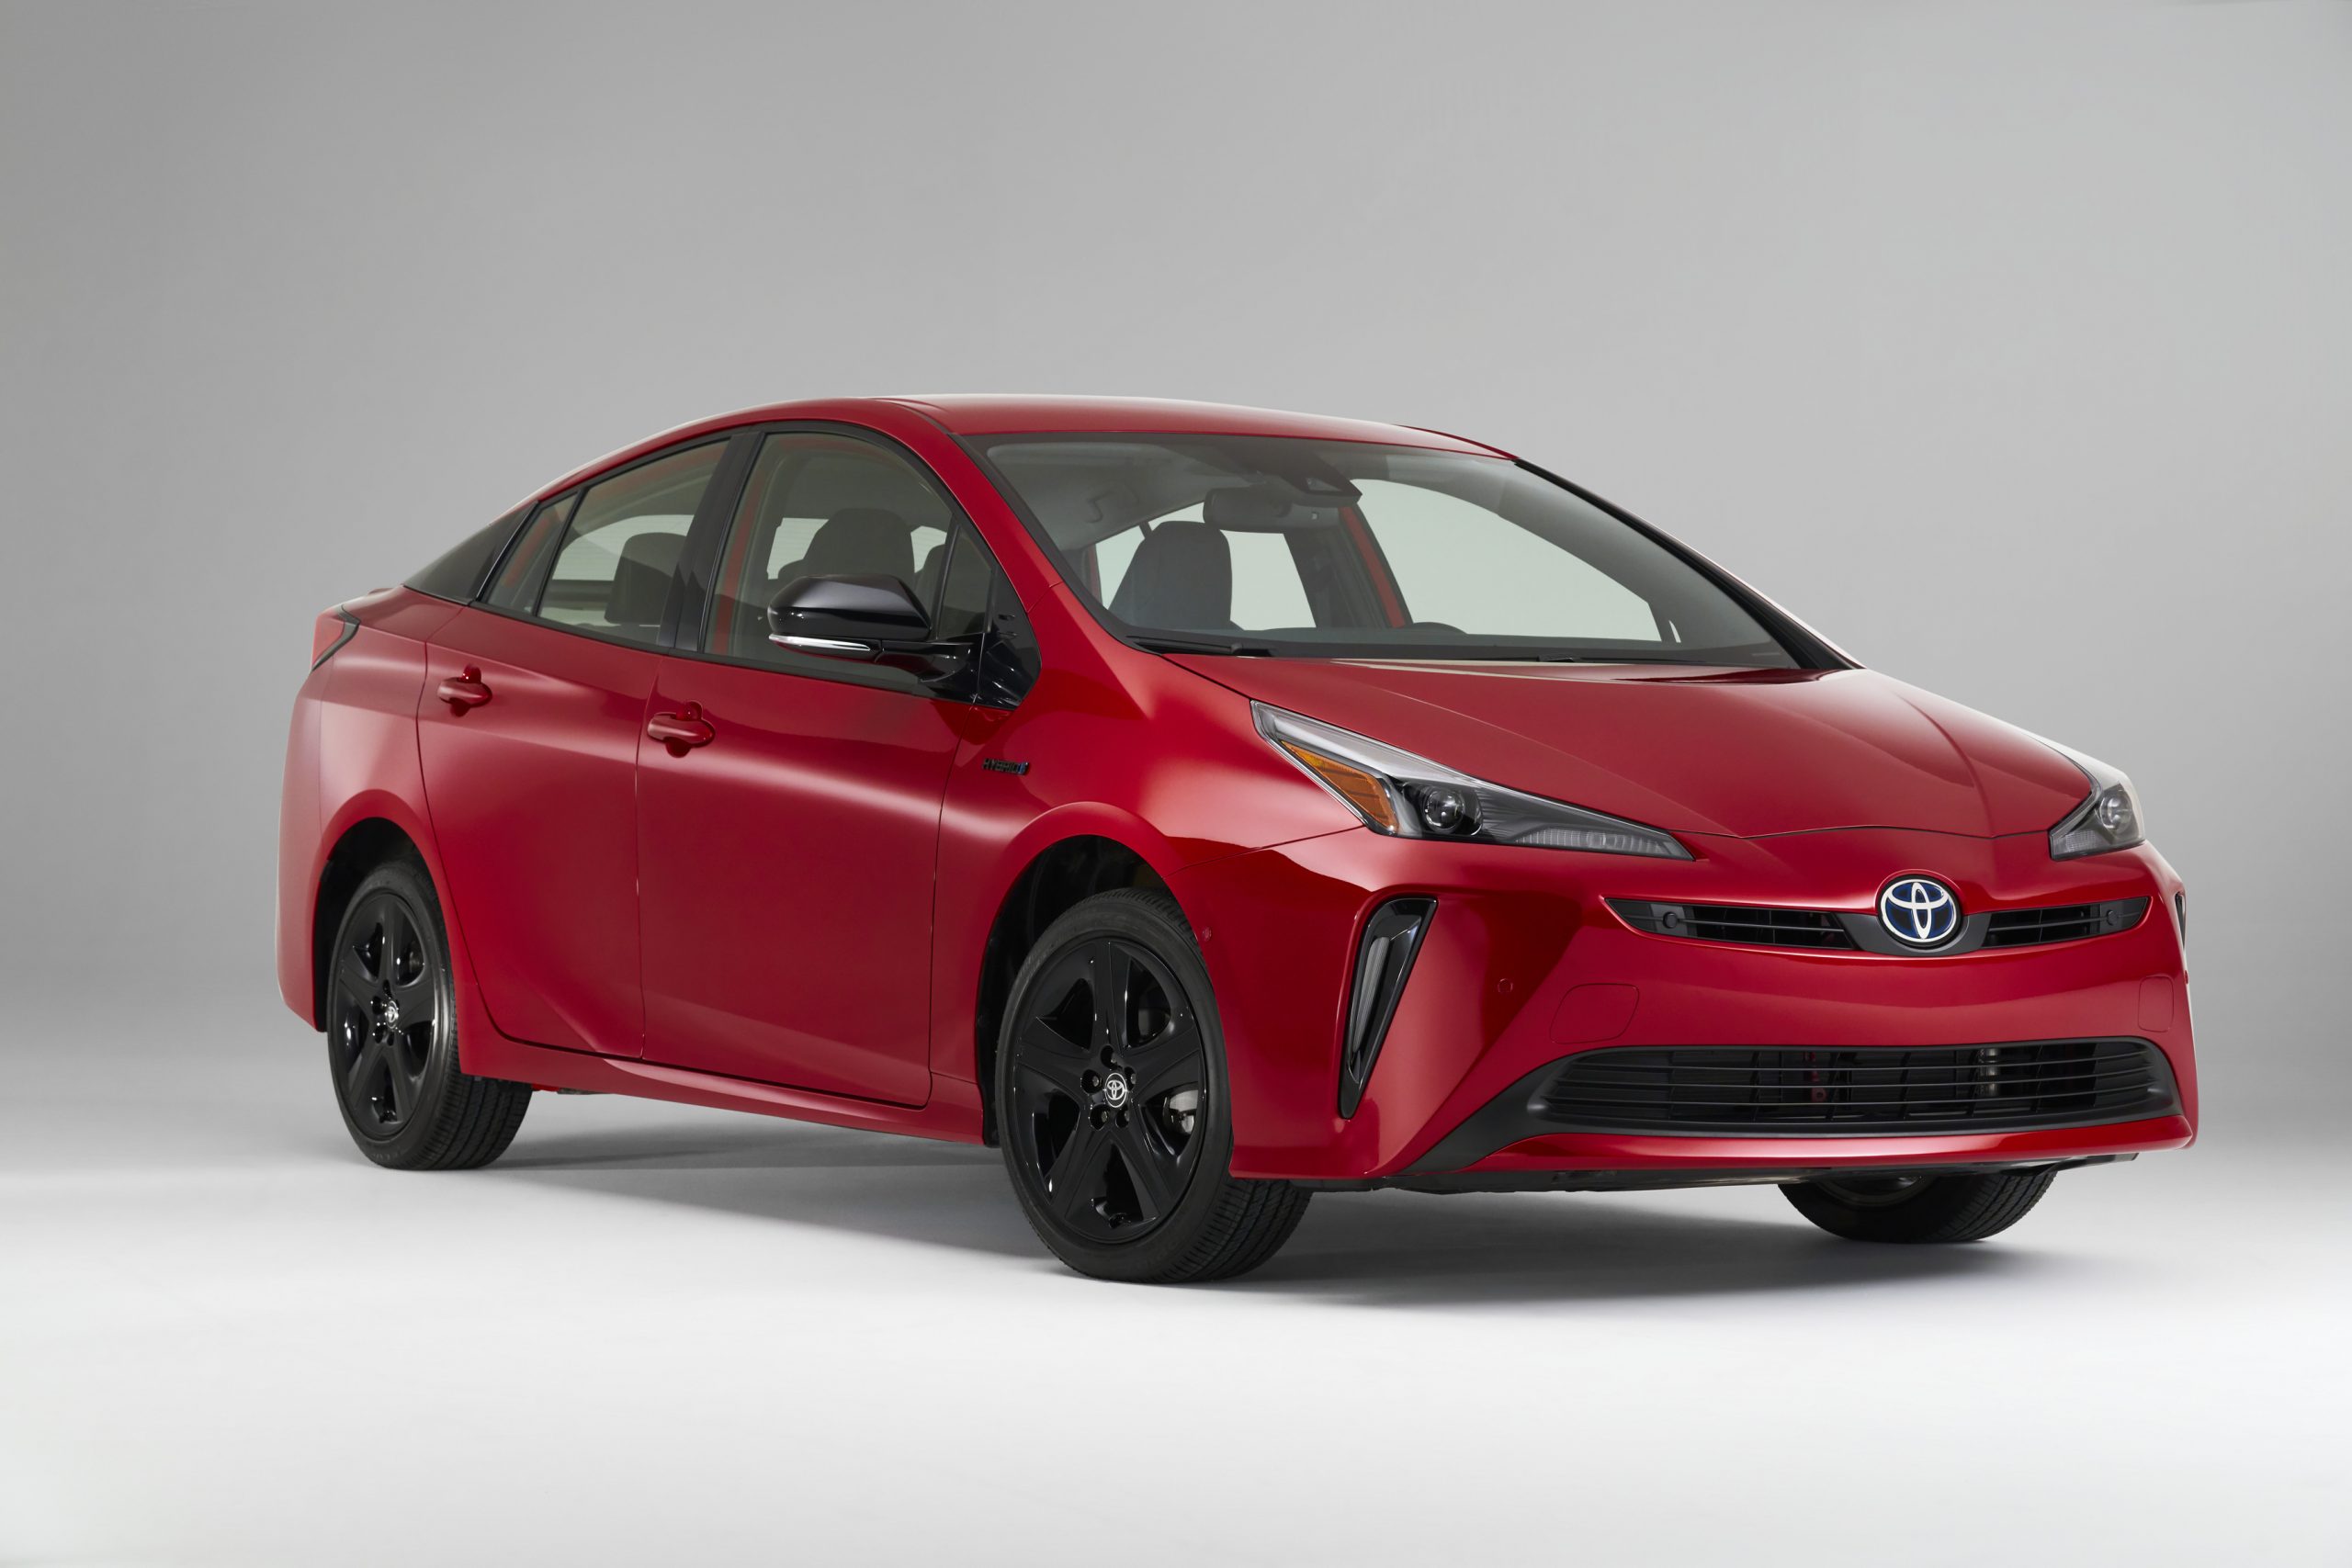 The Car That Changed an Industry: Toyota Marks 20th Anniversary of Prius  With Special Anniversary Edition - Toyota USA Newsroom